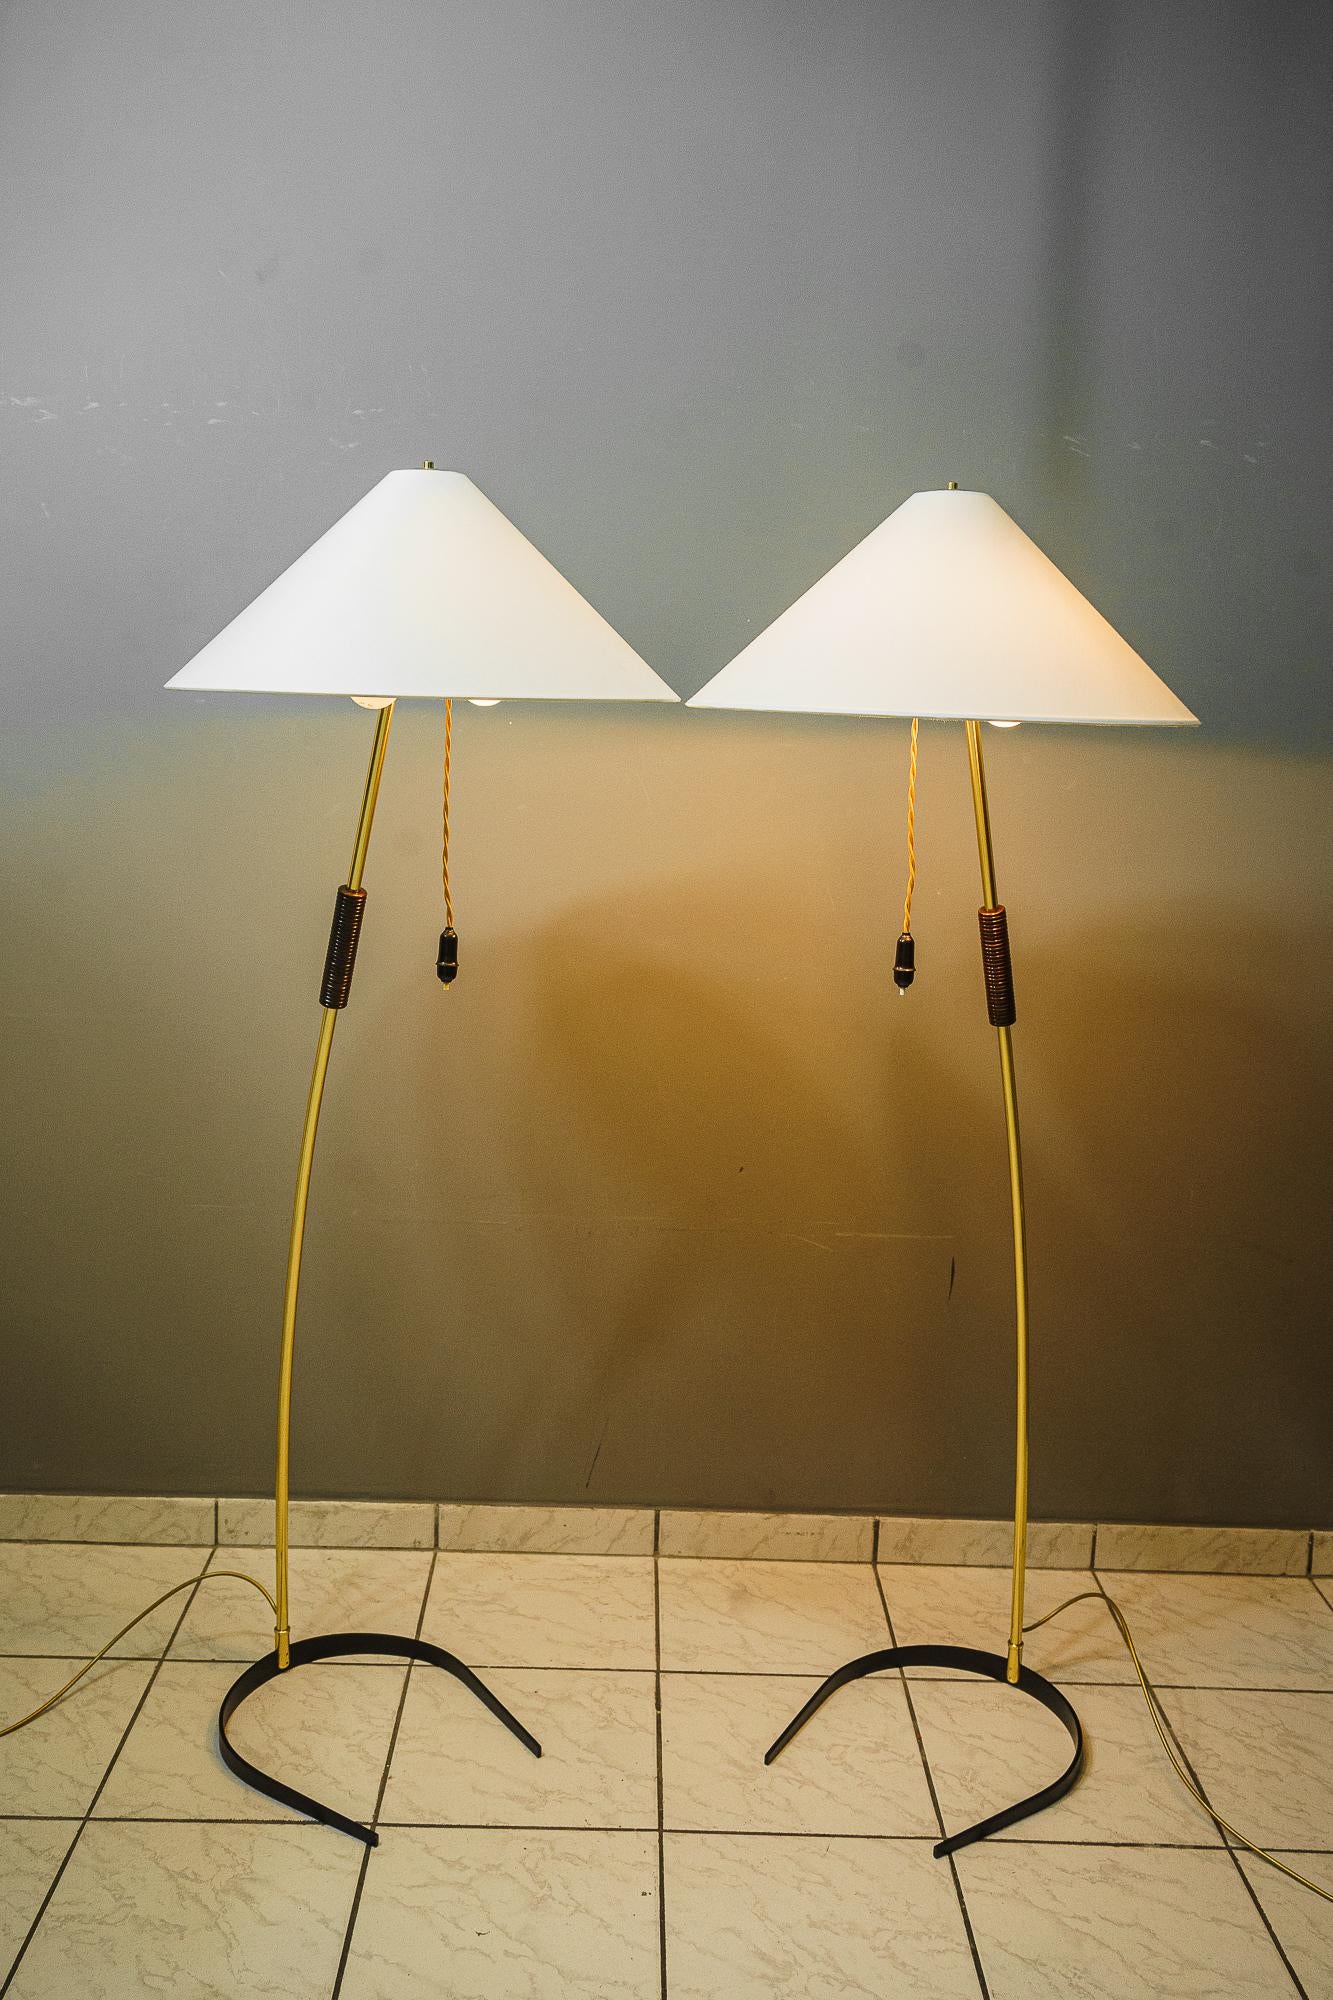 2x Rupert Nikoll Floor Lamps with Wood Handle, circa 1950s For Sale 4